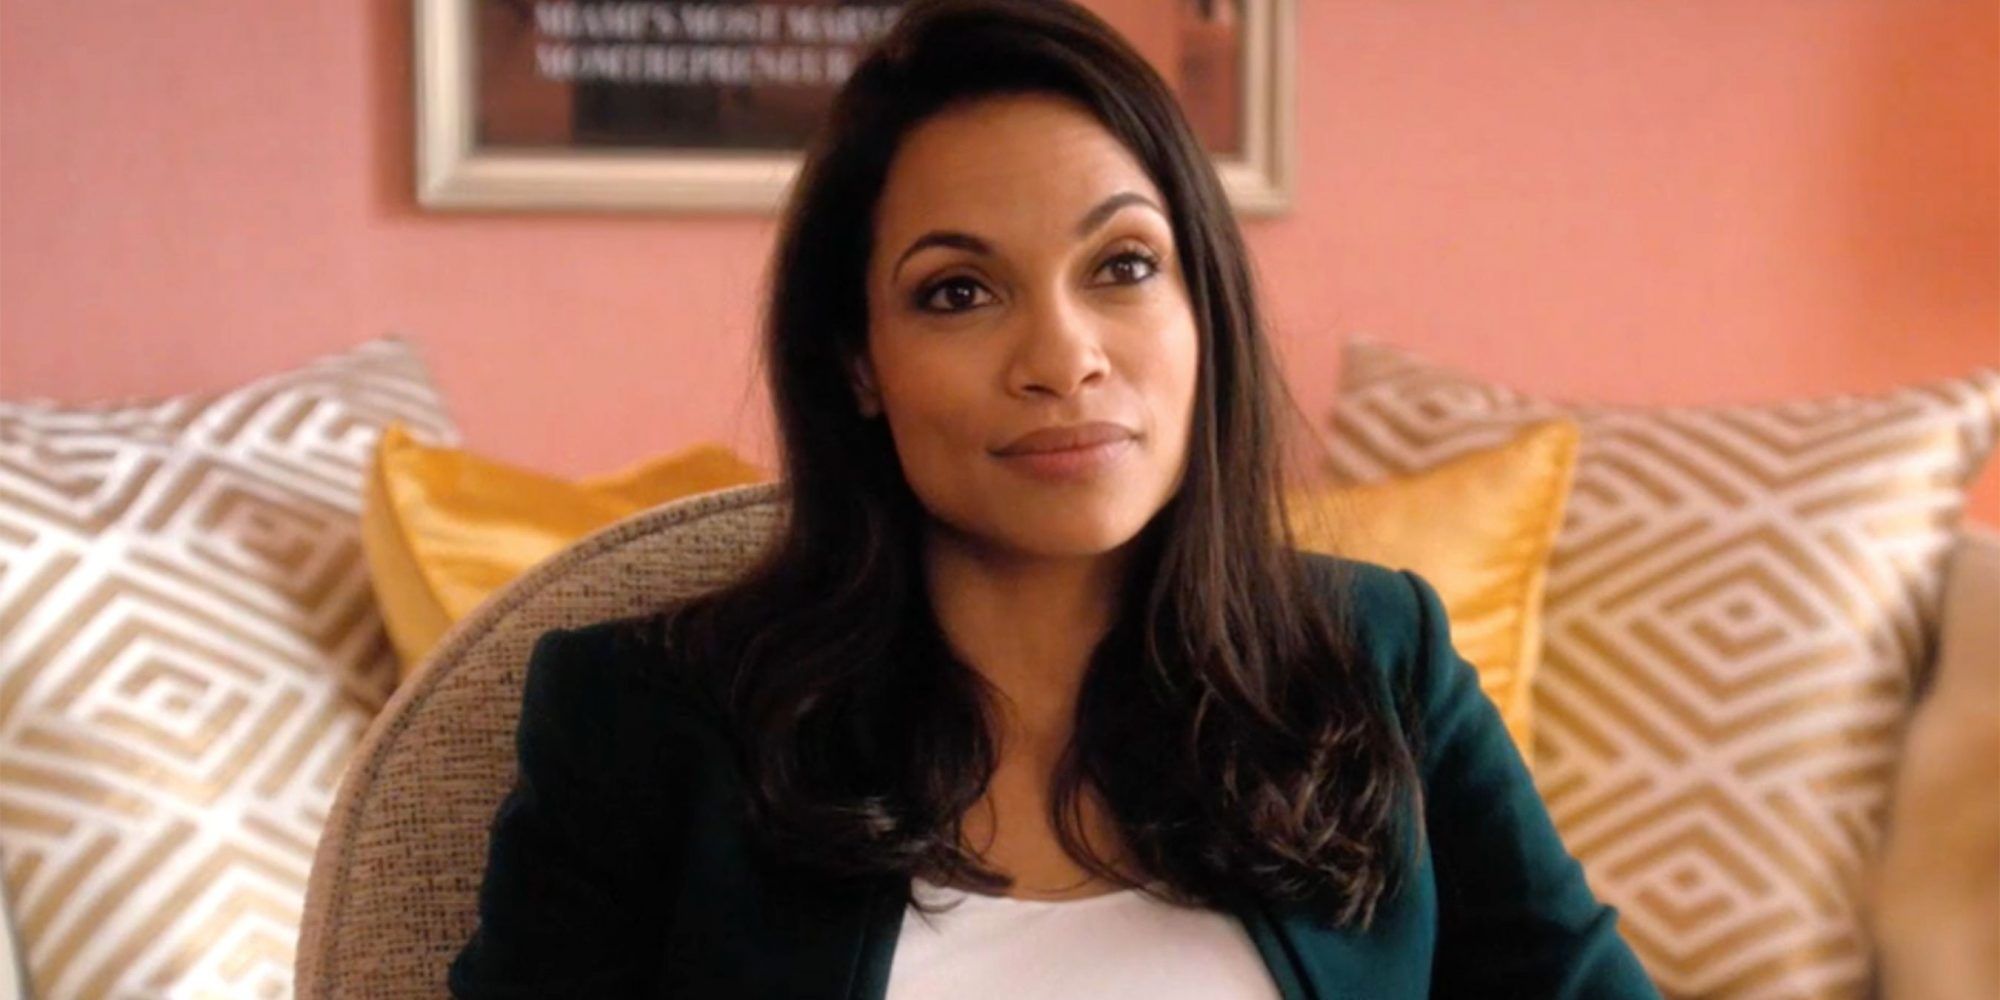 Rosario Dawsons Top 10 Roles Ranked By IMDb